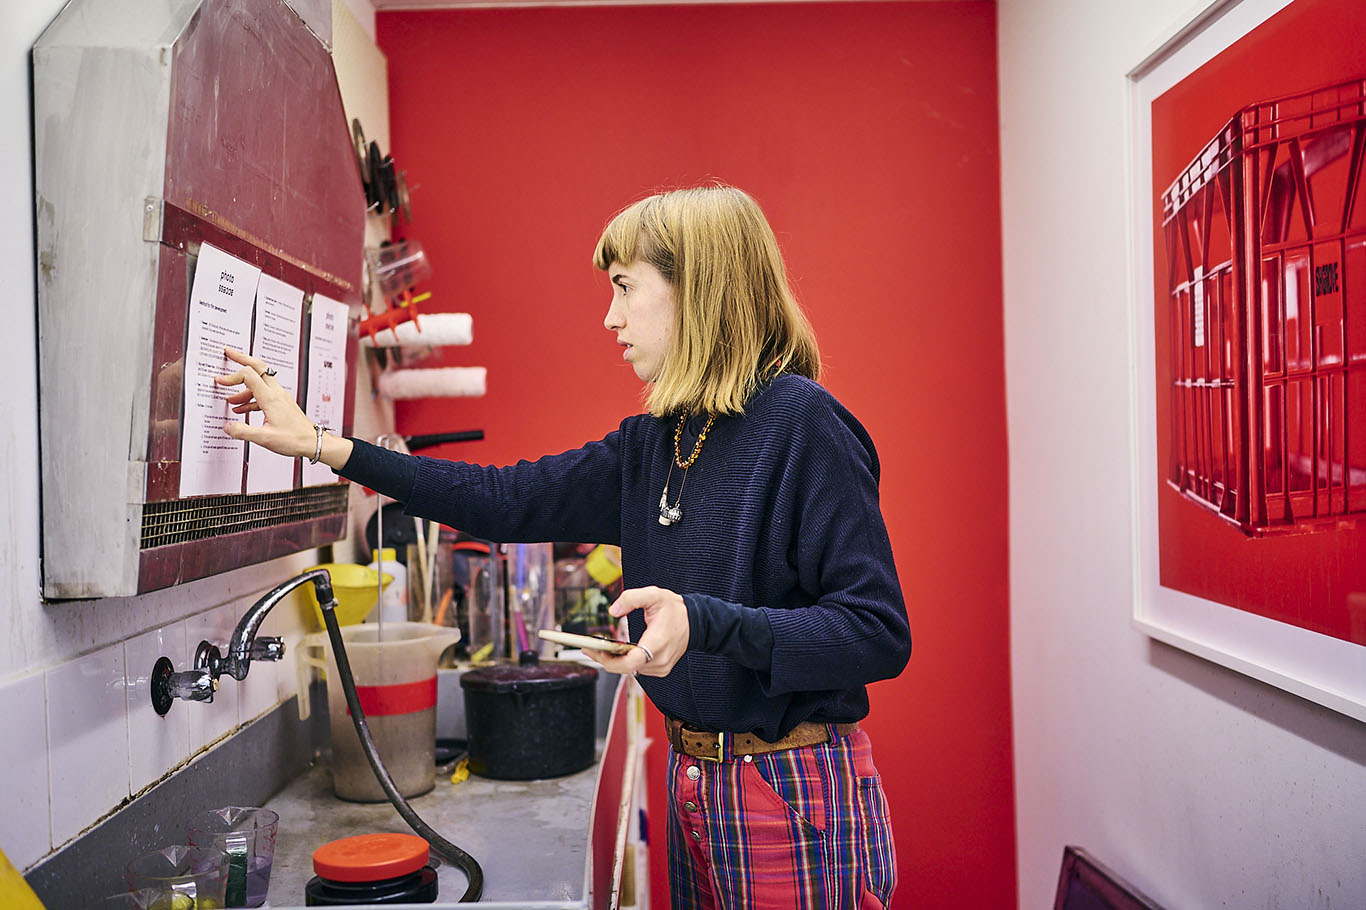 A photograph of a woman in profile, inside a narrow film developing room. She is pointing to some instructions on the wall, with a red painted wall in the background.